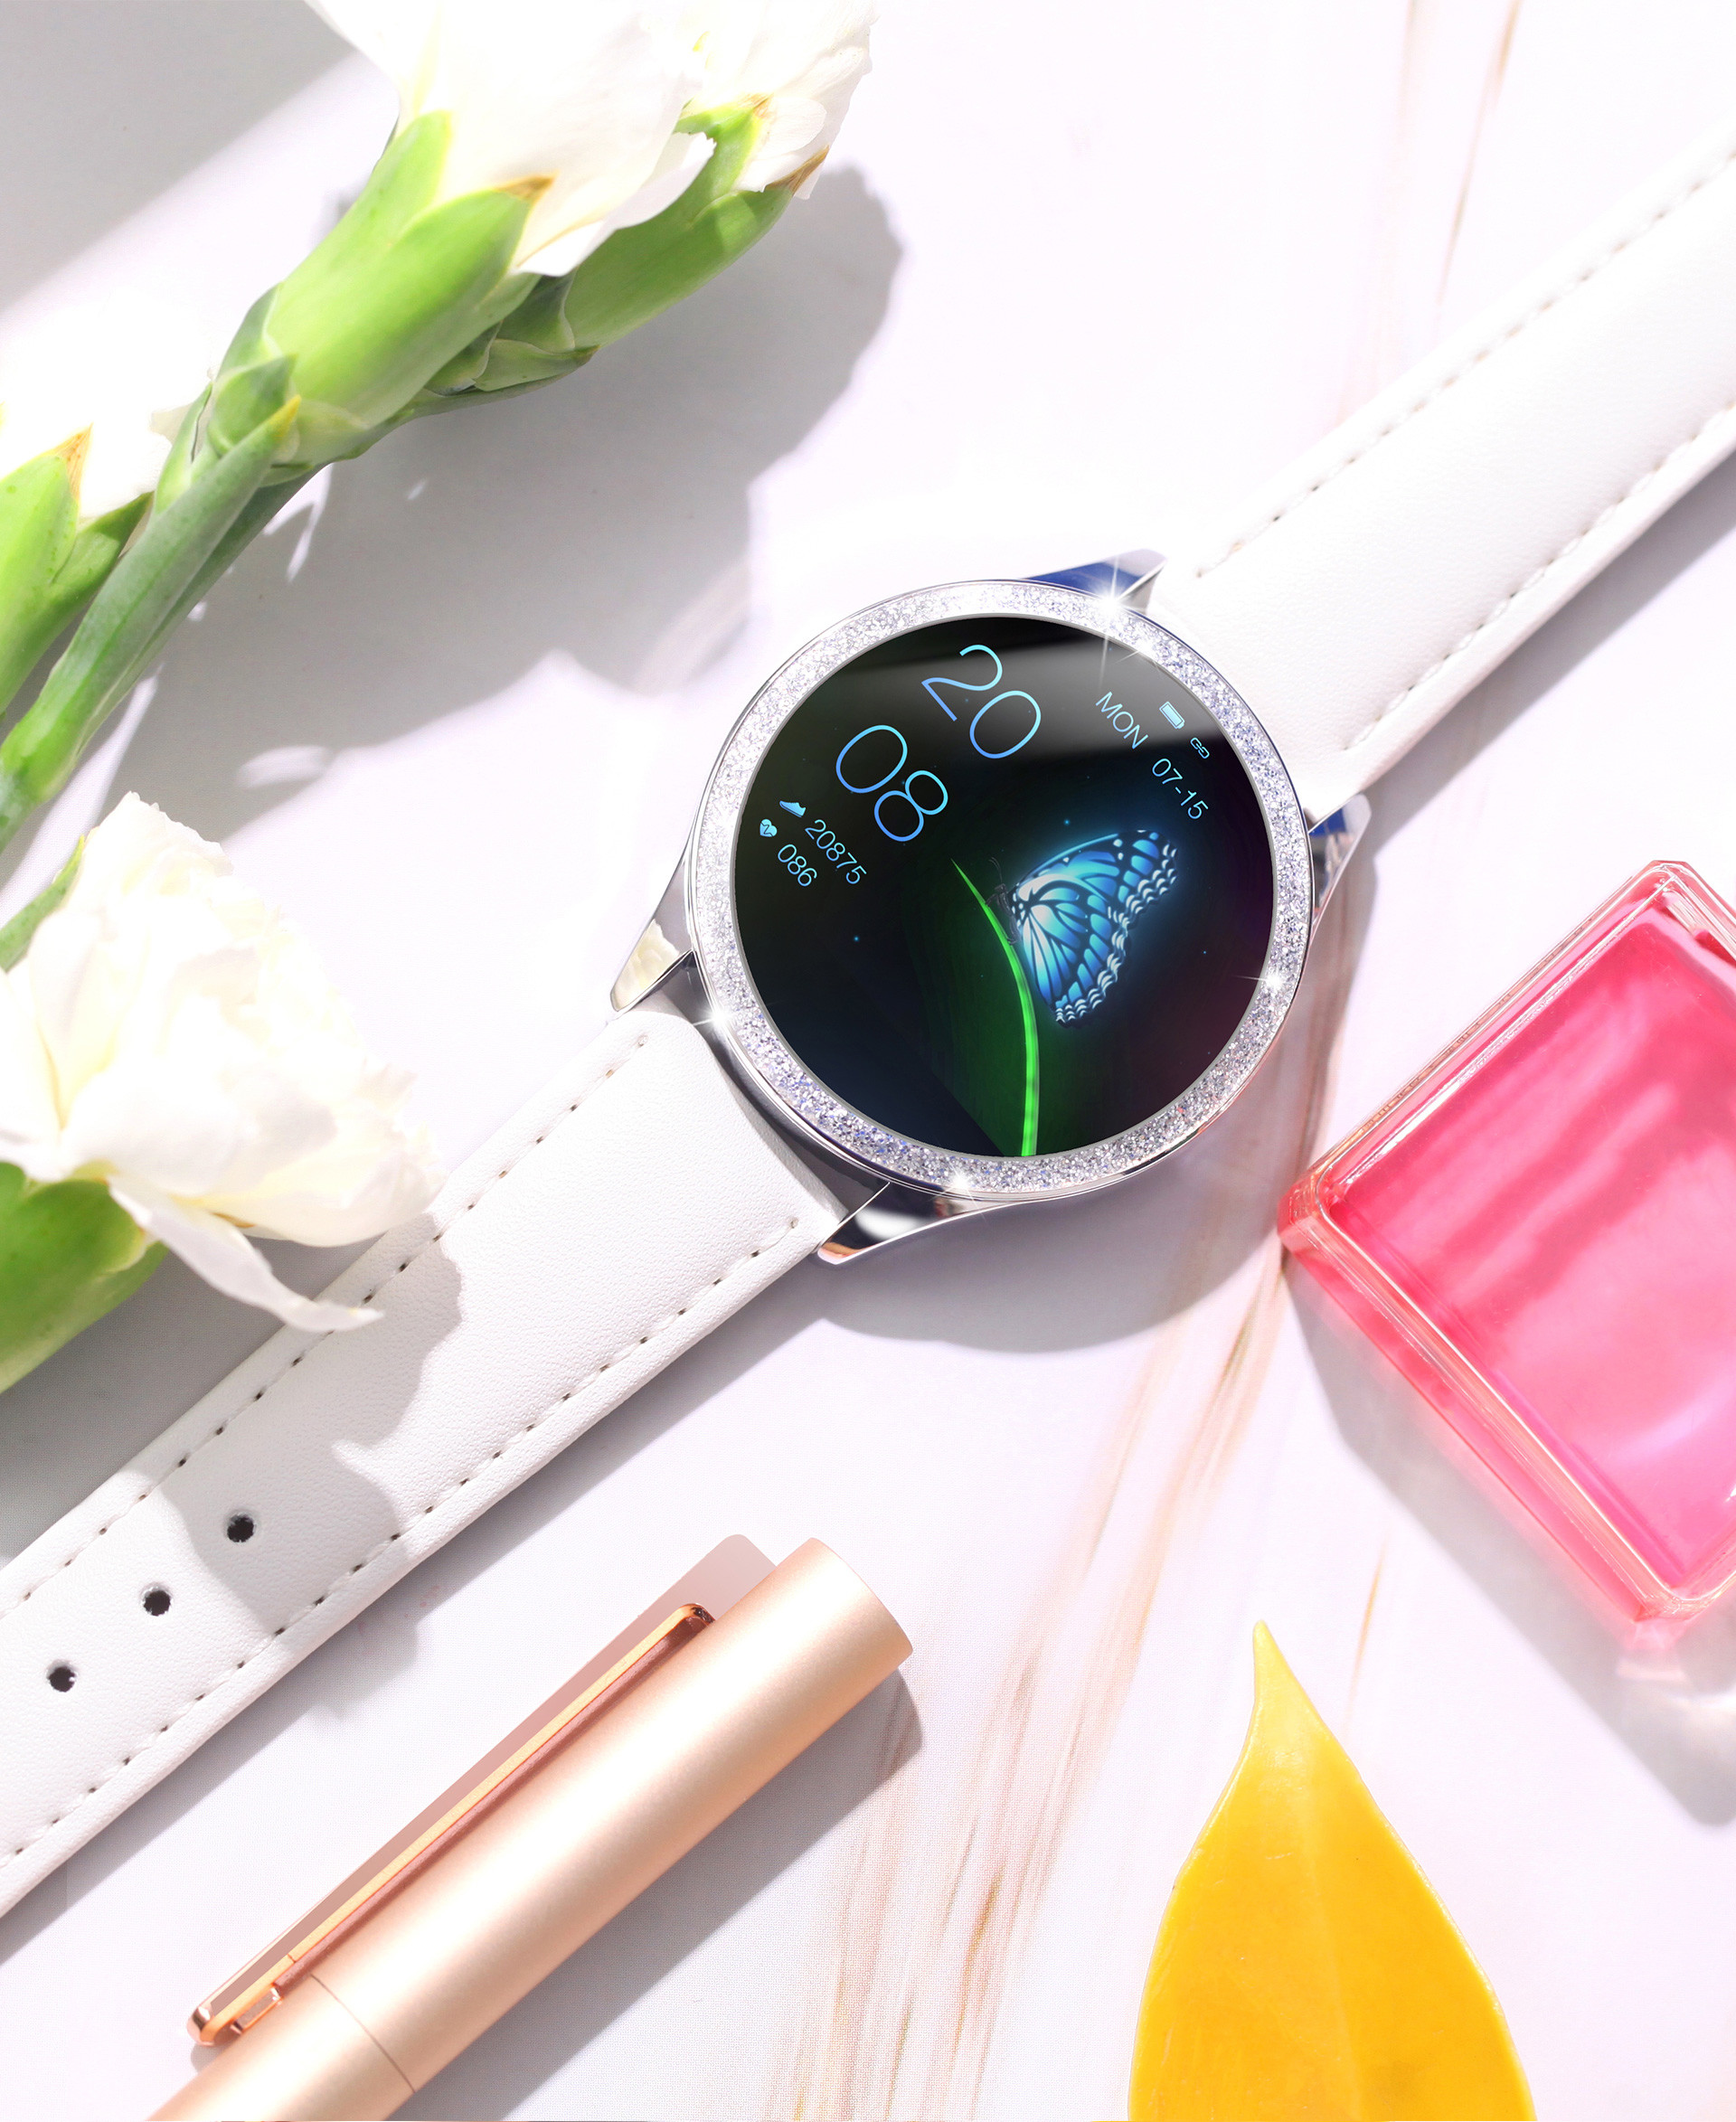 Round Lady Style NRF 52832 Heart Rate Monitor Smartwatch